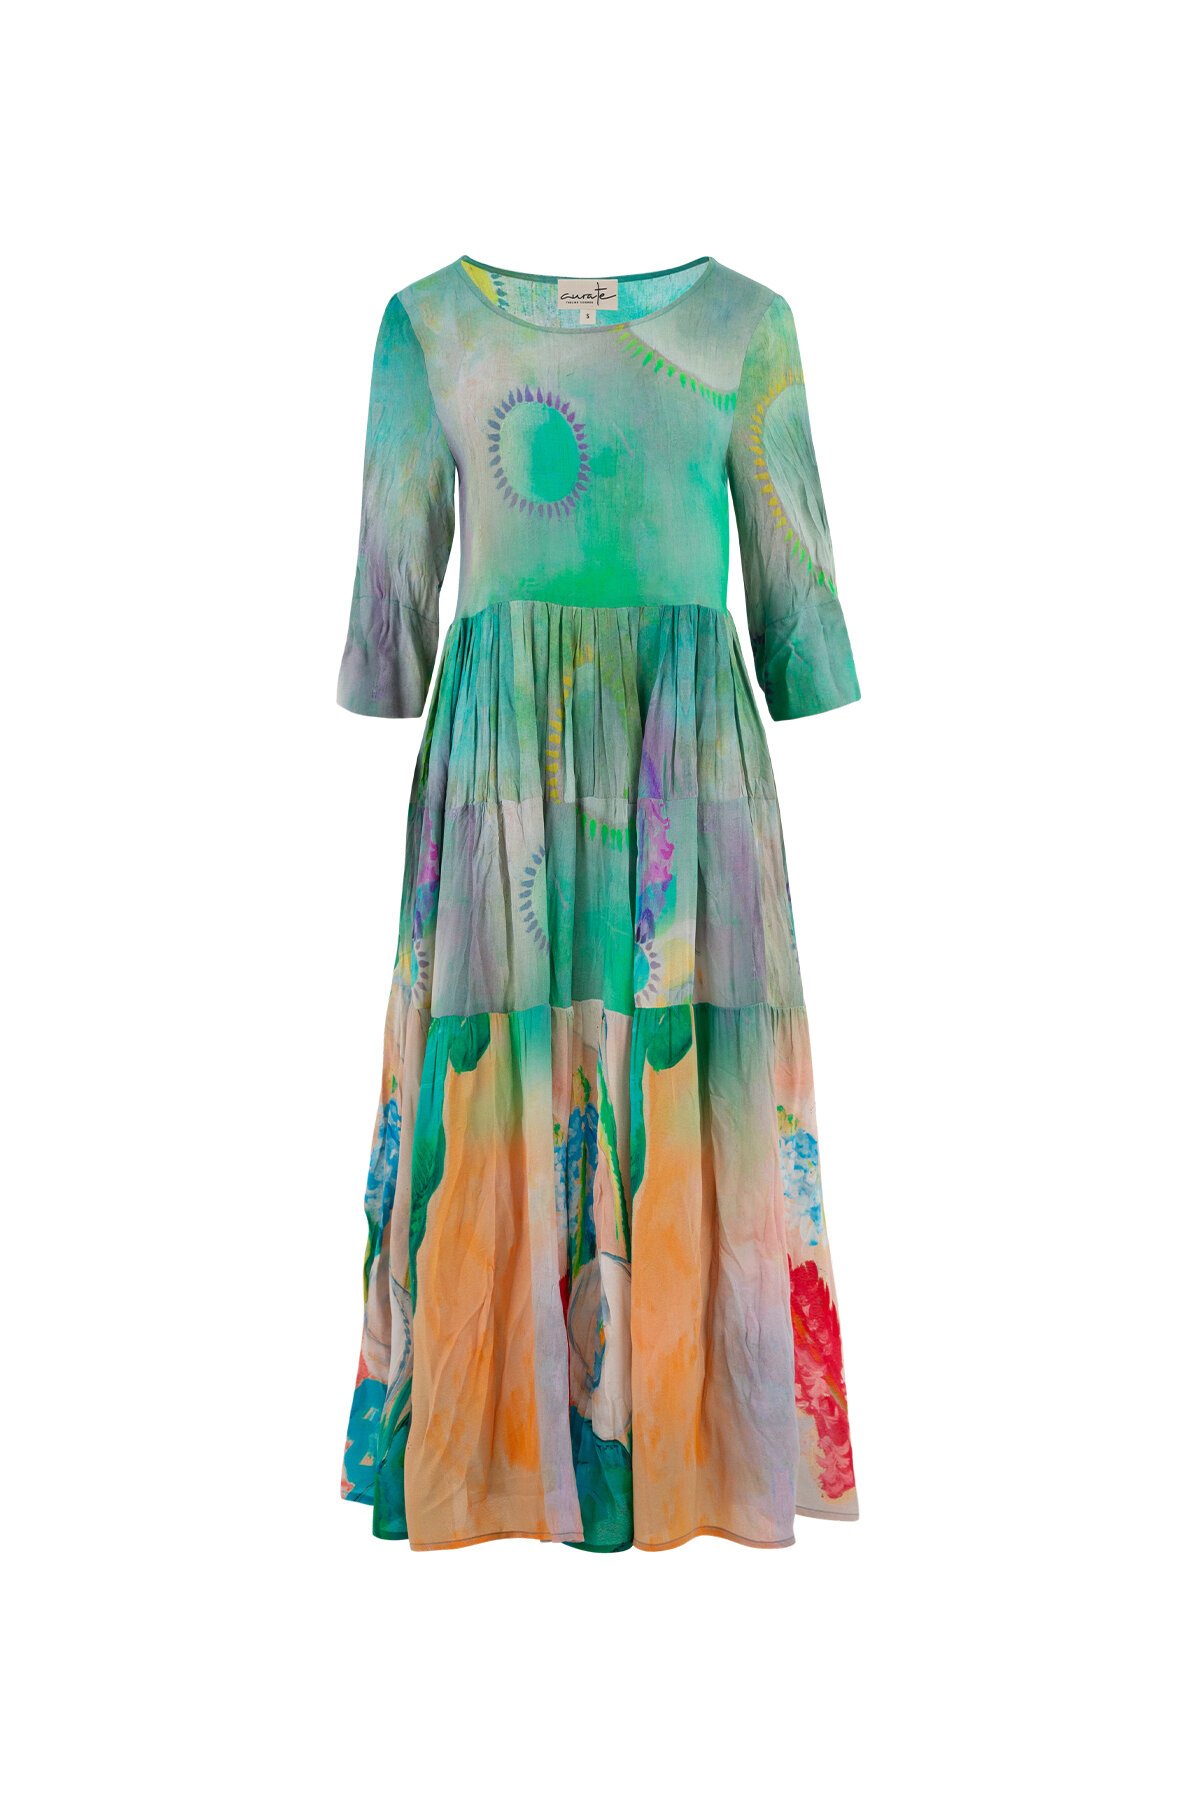 LOVE LONG Dress - The Outlet-Shop All : Trelise Cooper Online - LILY